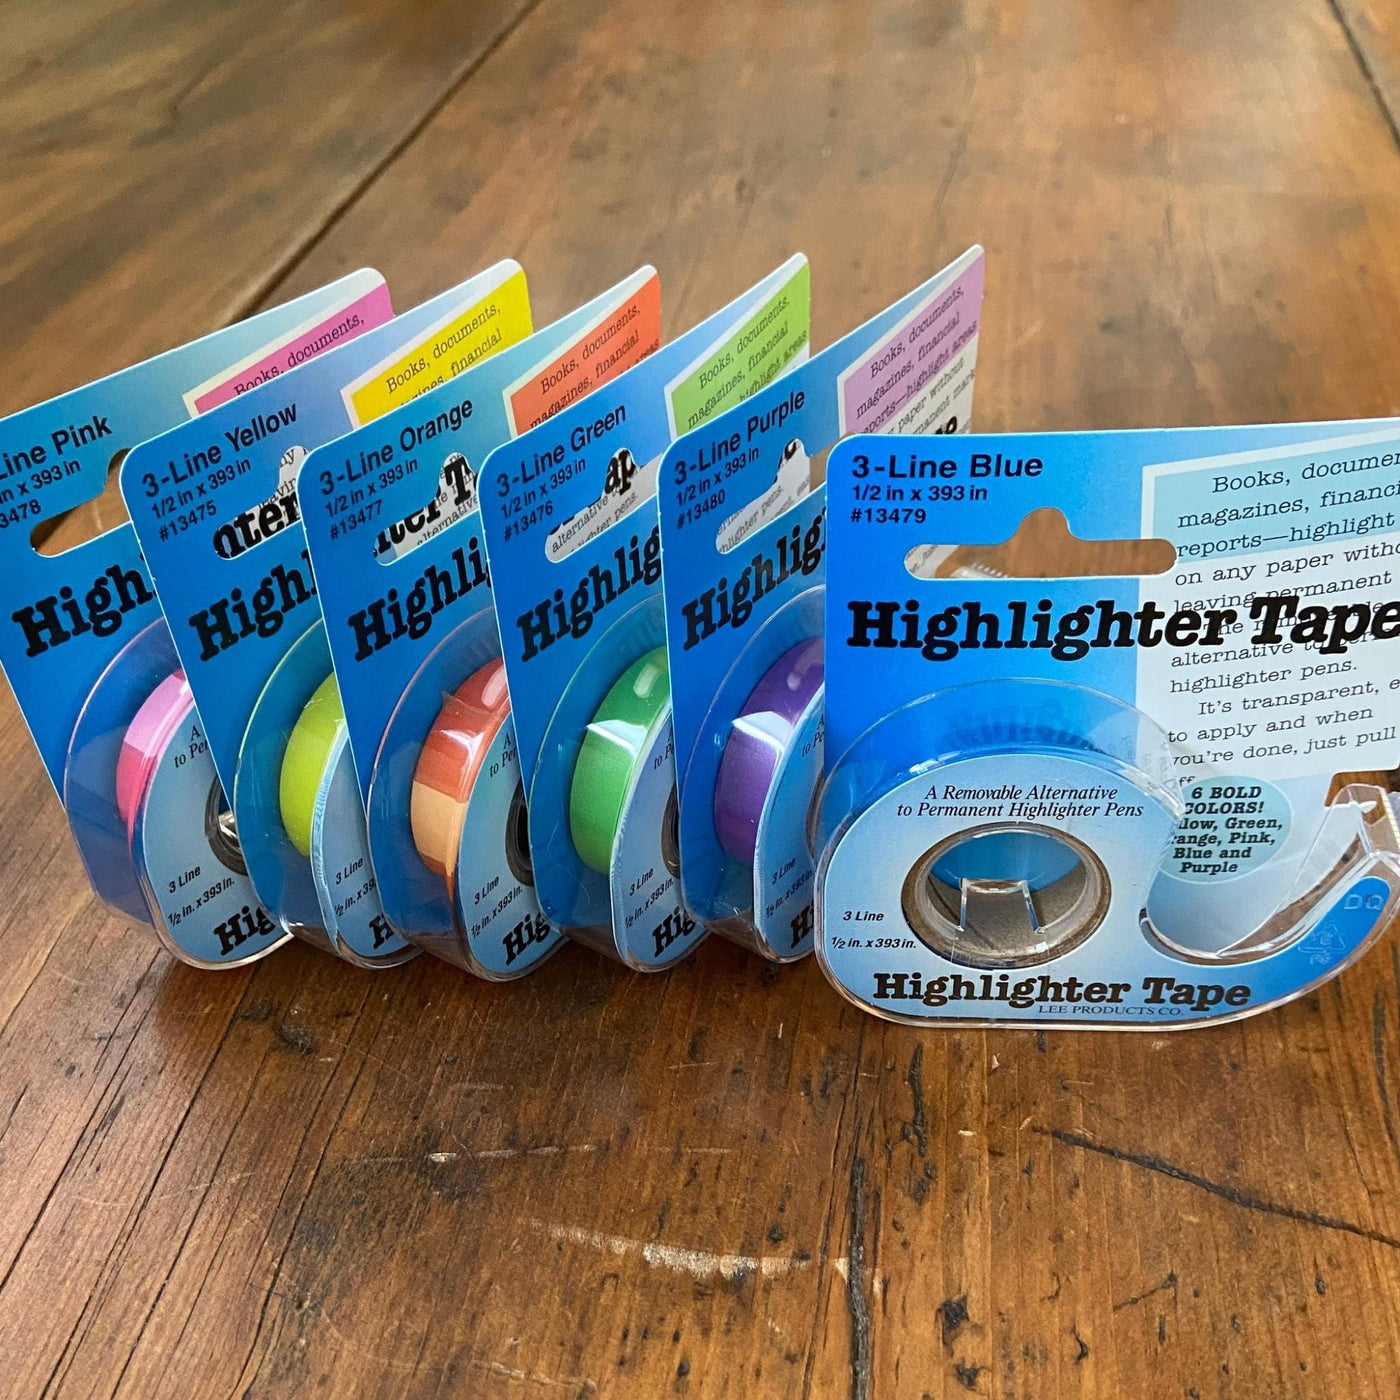 Collection of Highlighter tape in various colors sitting on table i